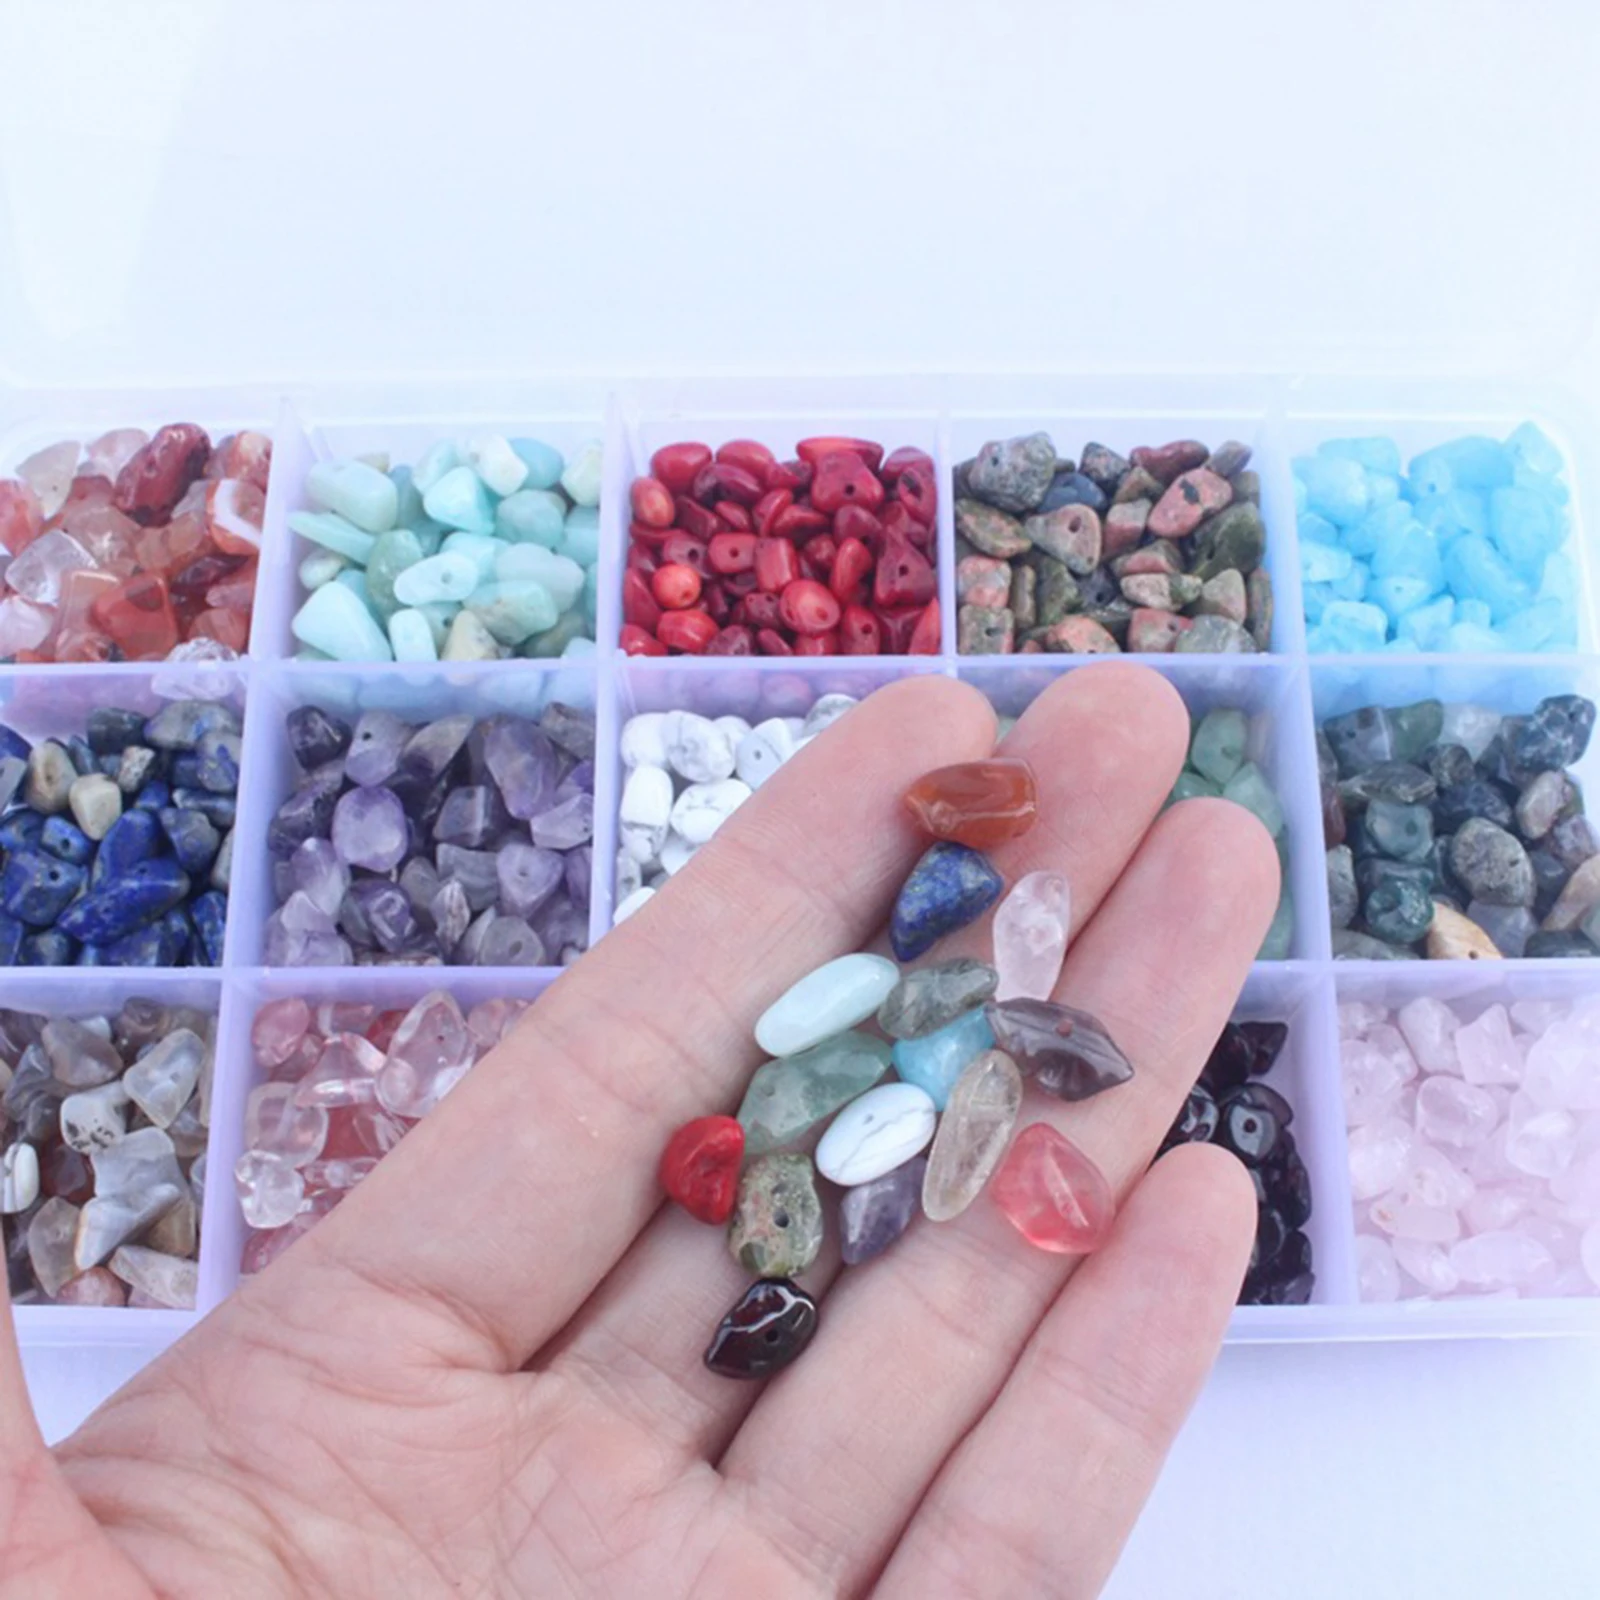 15 Grid Mixed Natural Stone Boxed Crushed Crystal Stones Chips Beads for Home Stones Degaussing Beads DIY